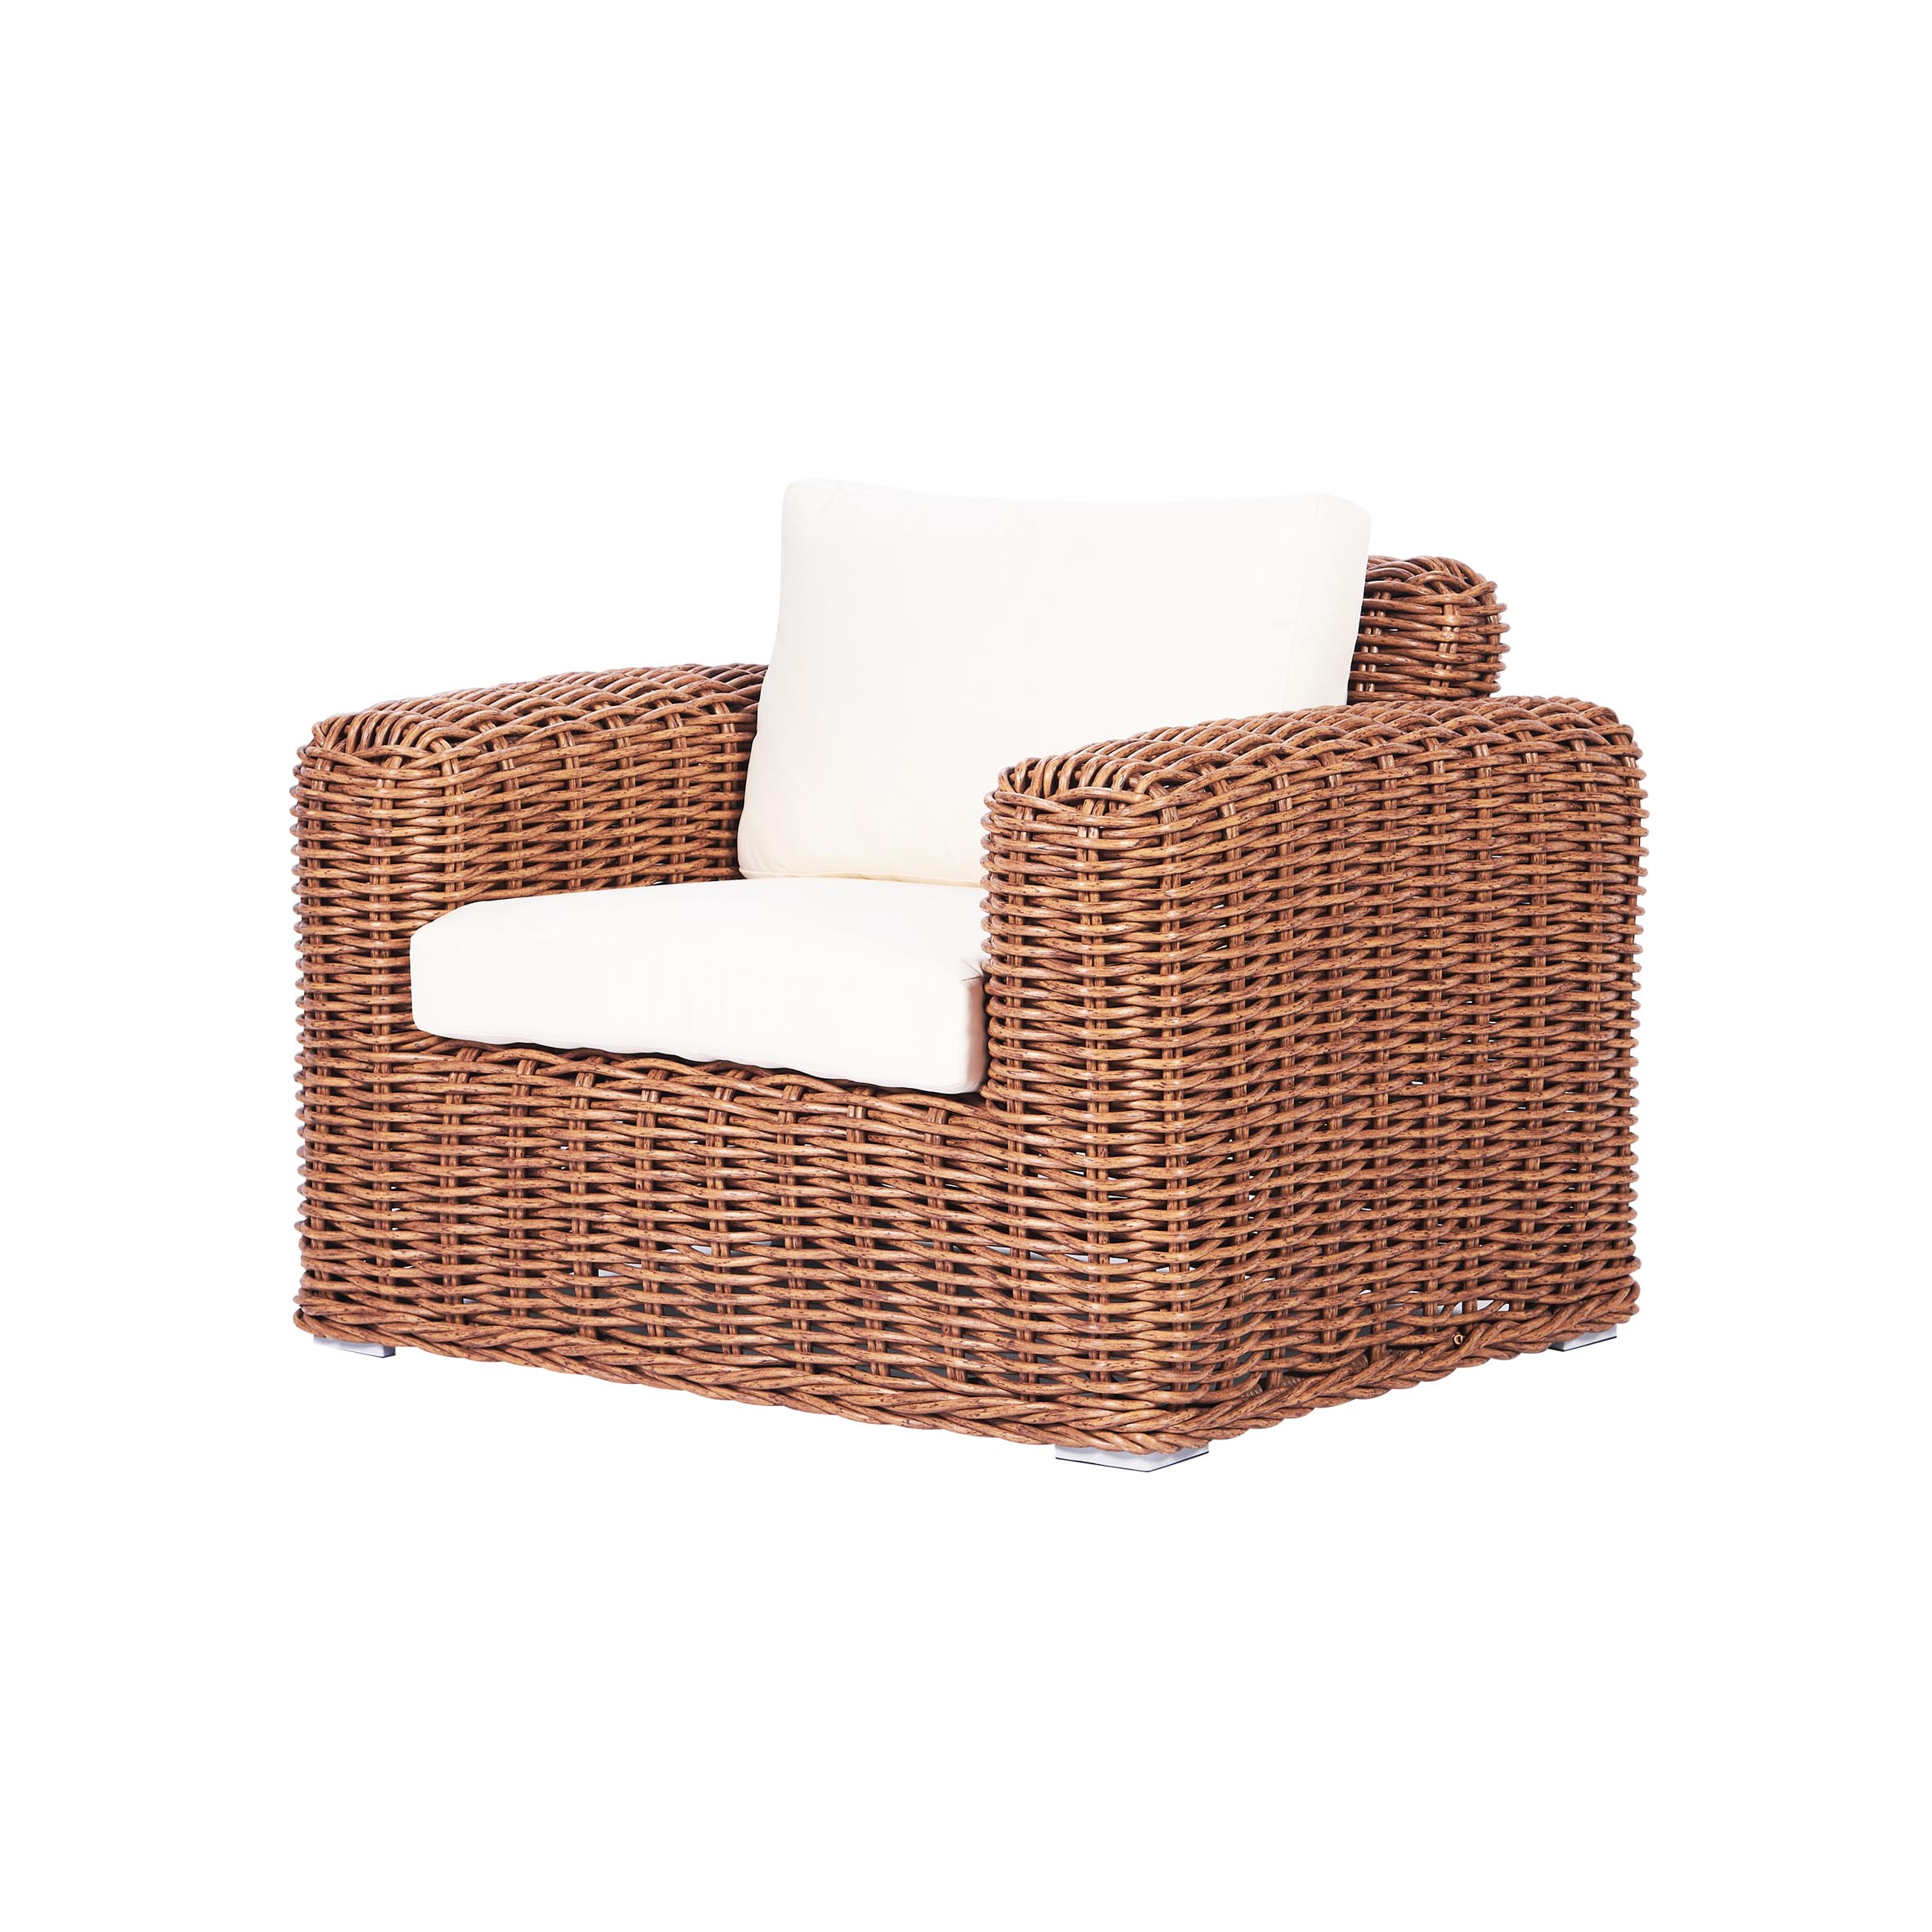 Factory-direct Island Rattan Single Sofa: Stylish Seating for Any Space